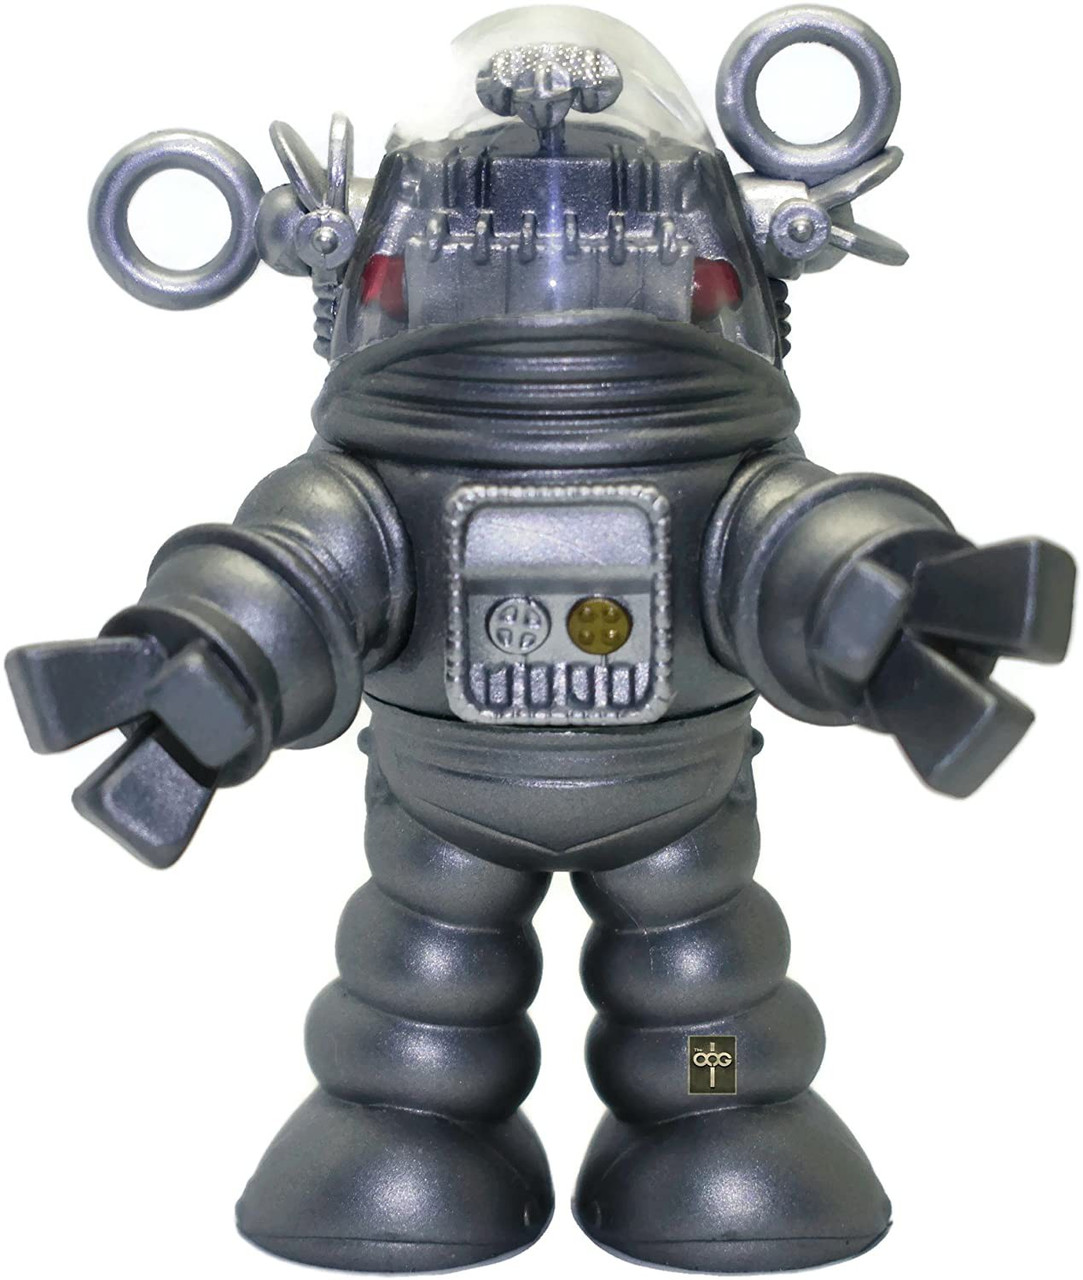 Funko Sci Fi Mystery Minis Series 1 Robby The Robot 112 Mystery Minifigure Forbidden Planet Loose Toywiz - robby the robot roblox coloring pages piggy